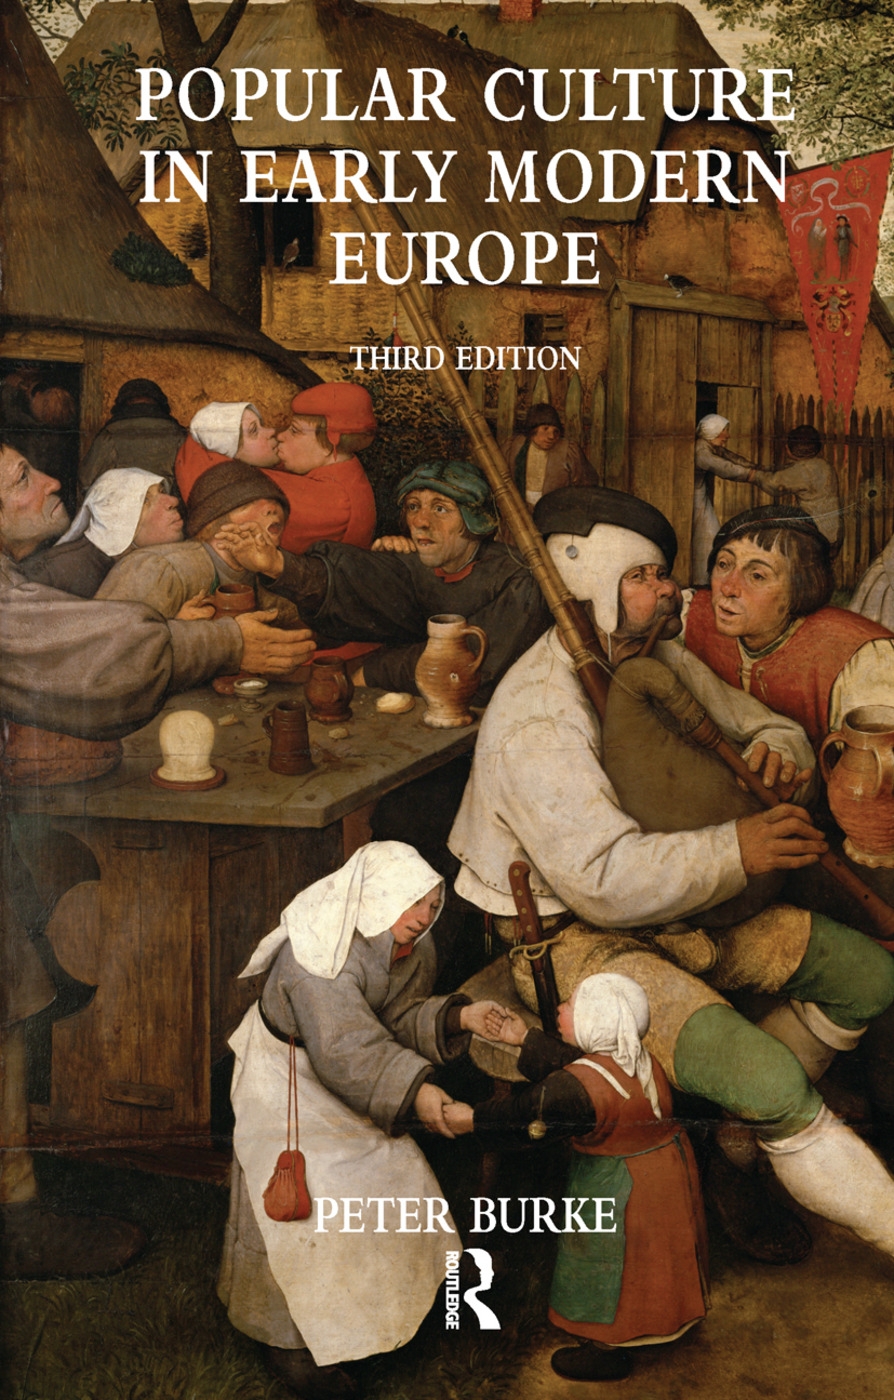 Popular Culture in Early Modern Europe. by Peter Burke